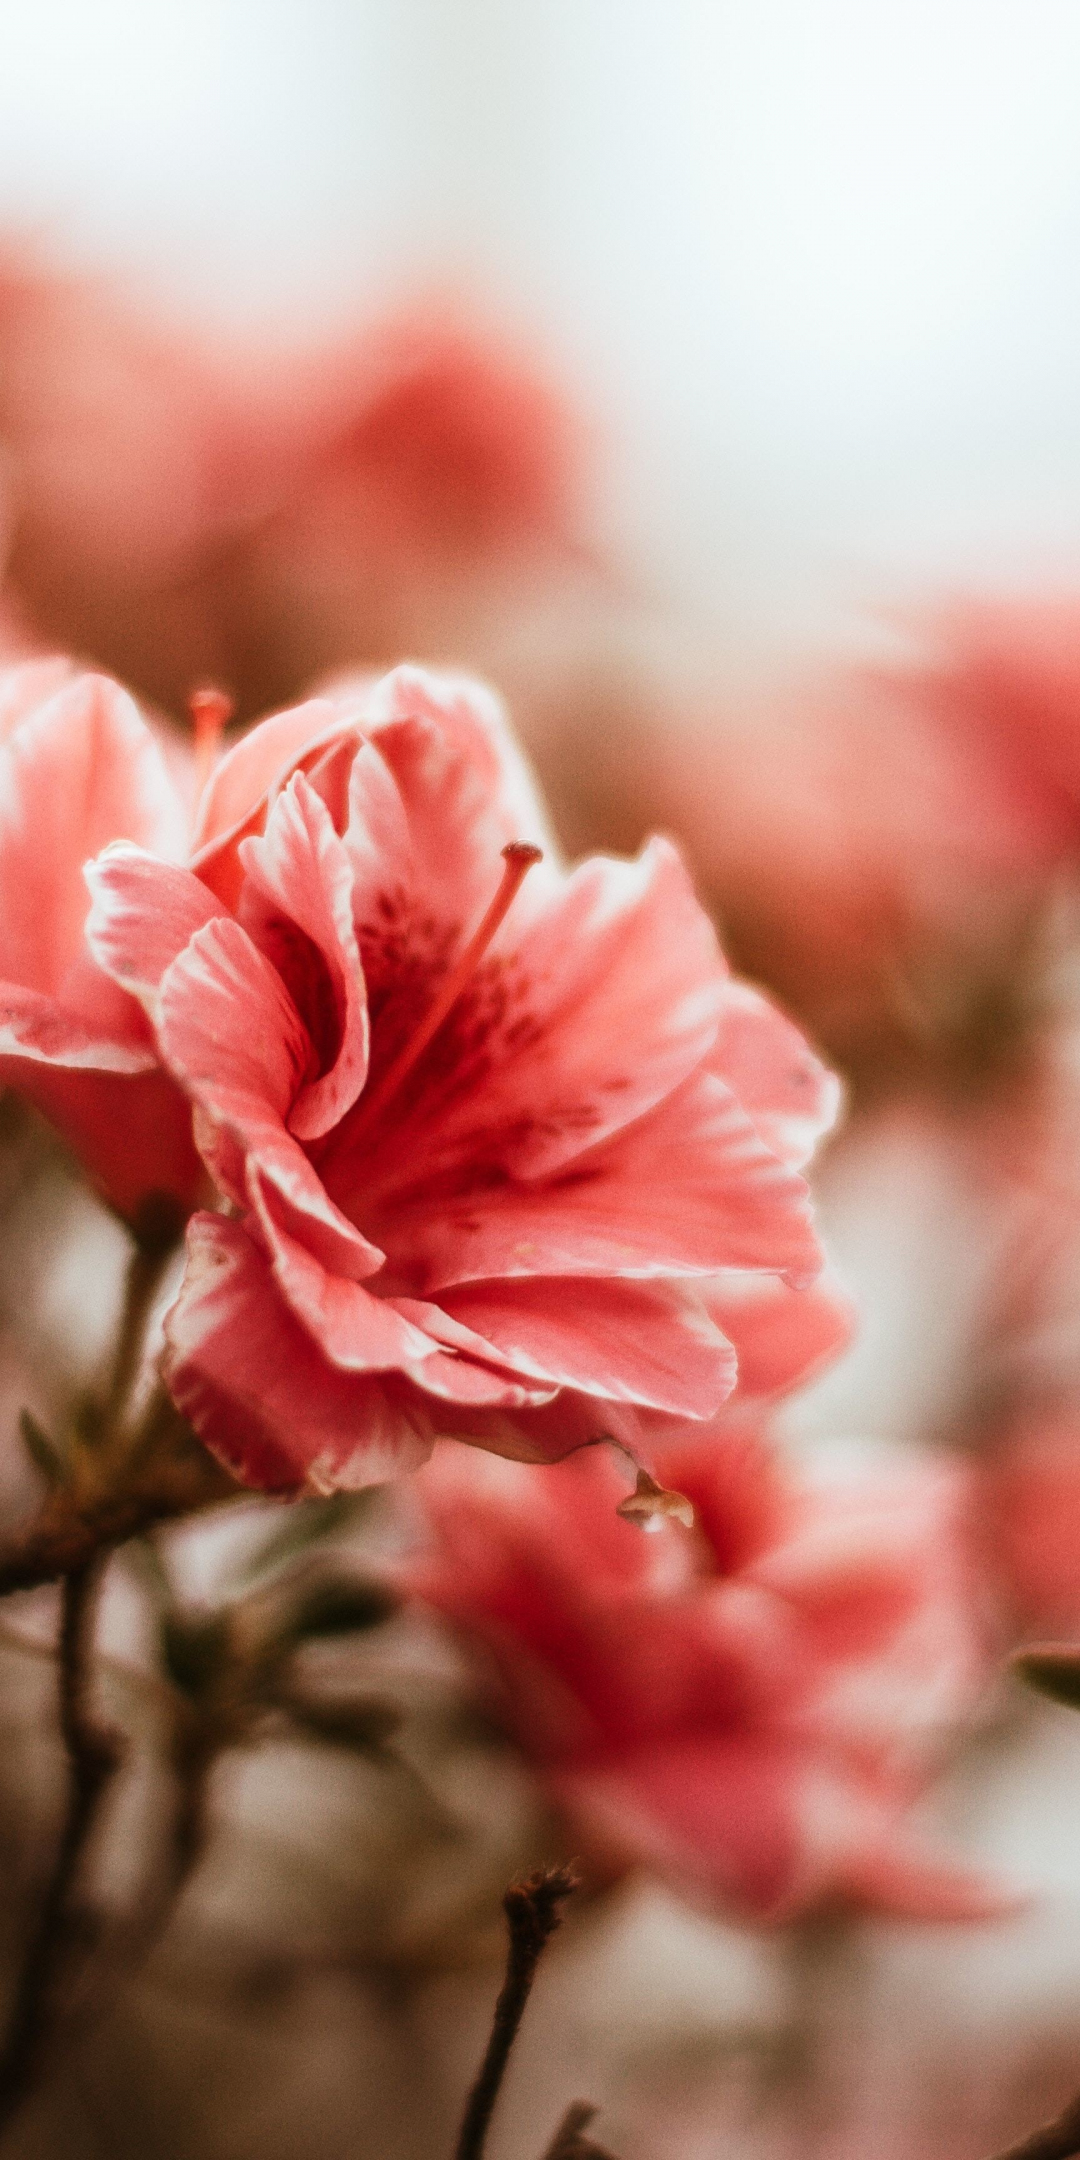 Download wallpaper 1080x2160 blossom, flowers, pink, portrait, honor 7x, honor 9 lite, honor